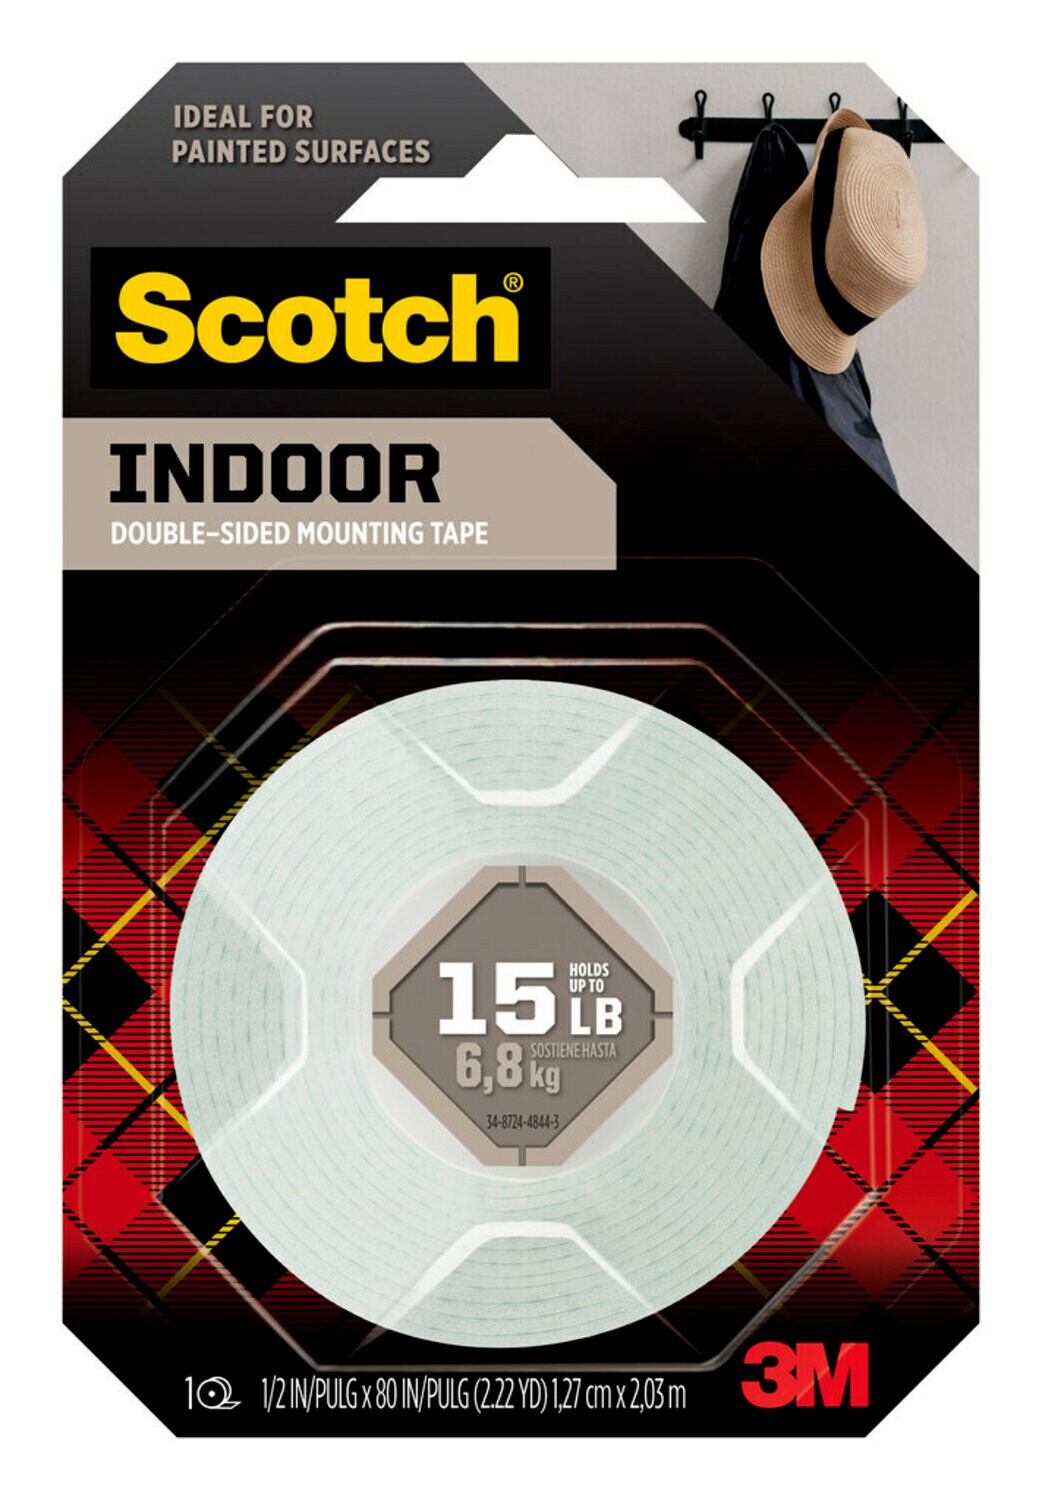 7100235235 - Scotch Indoor Double-Sided Mounting Tape 110S, 0.5 in x 80 in (1.27 cm x 2.03 m)